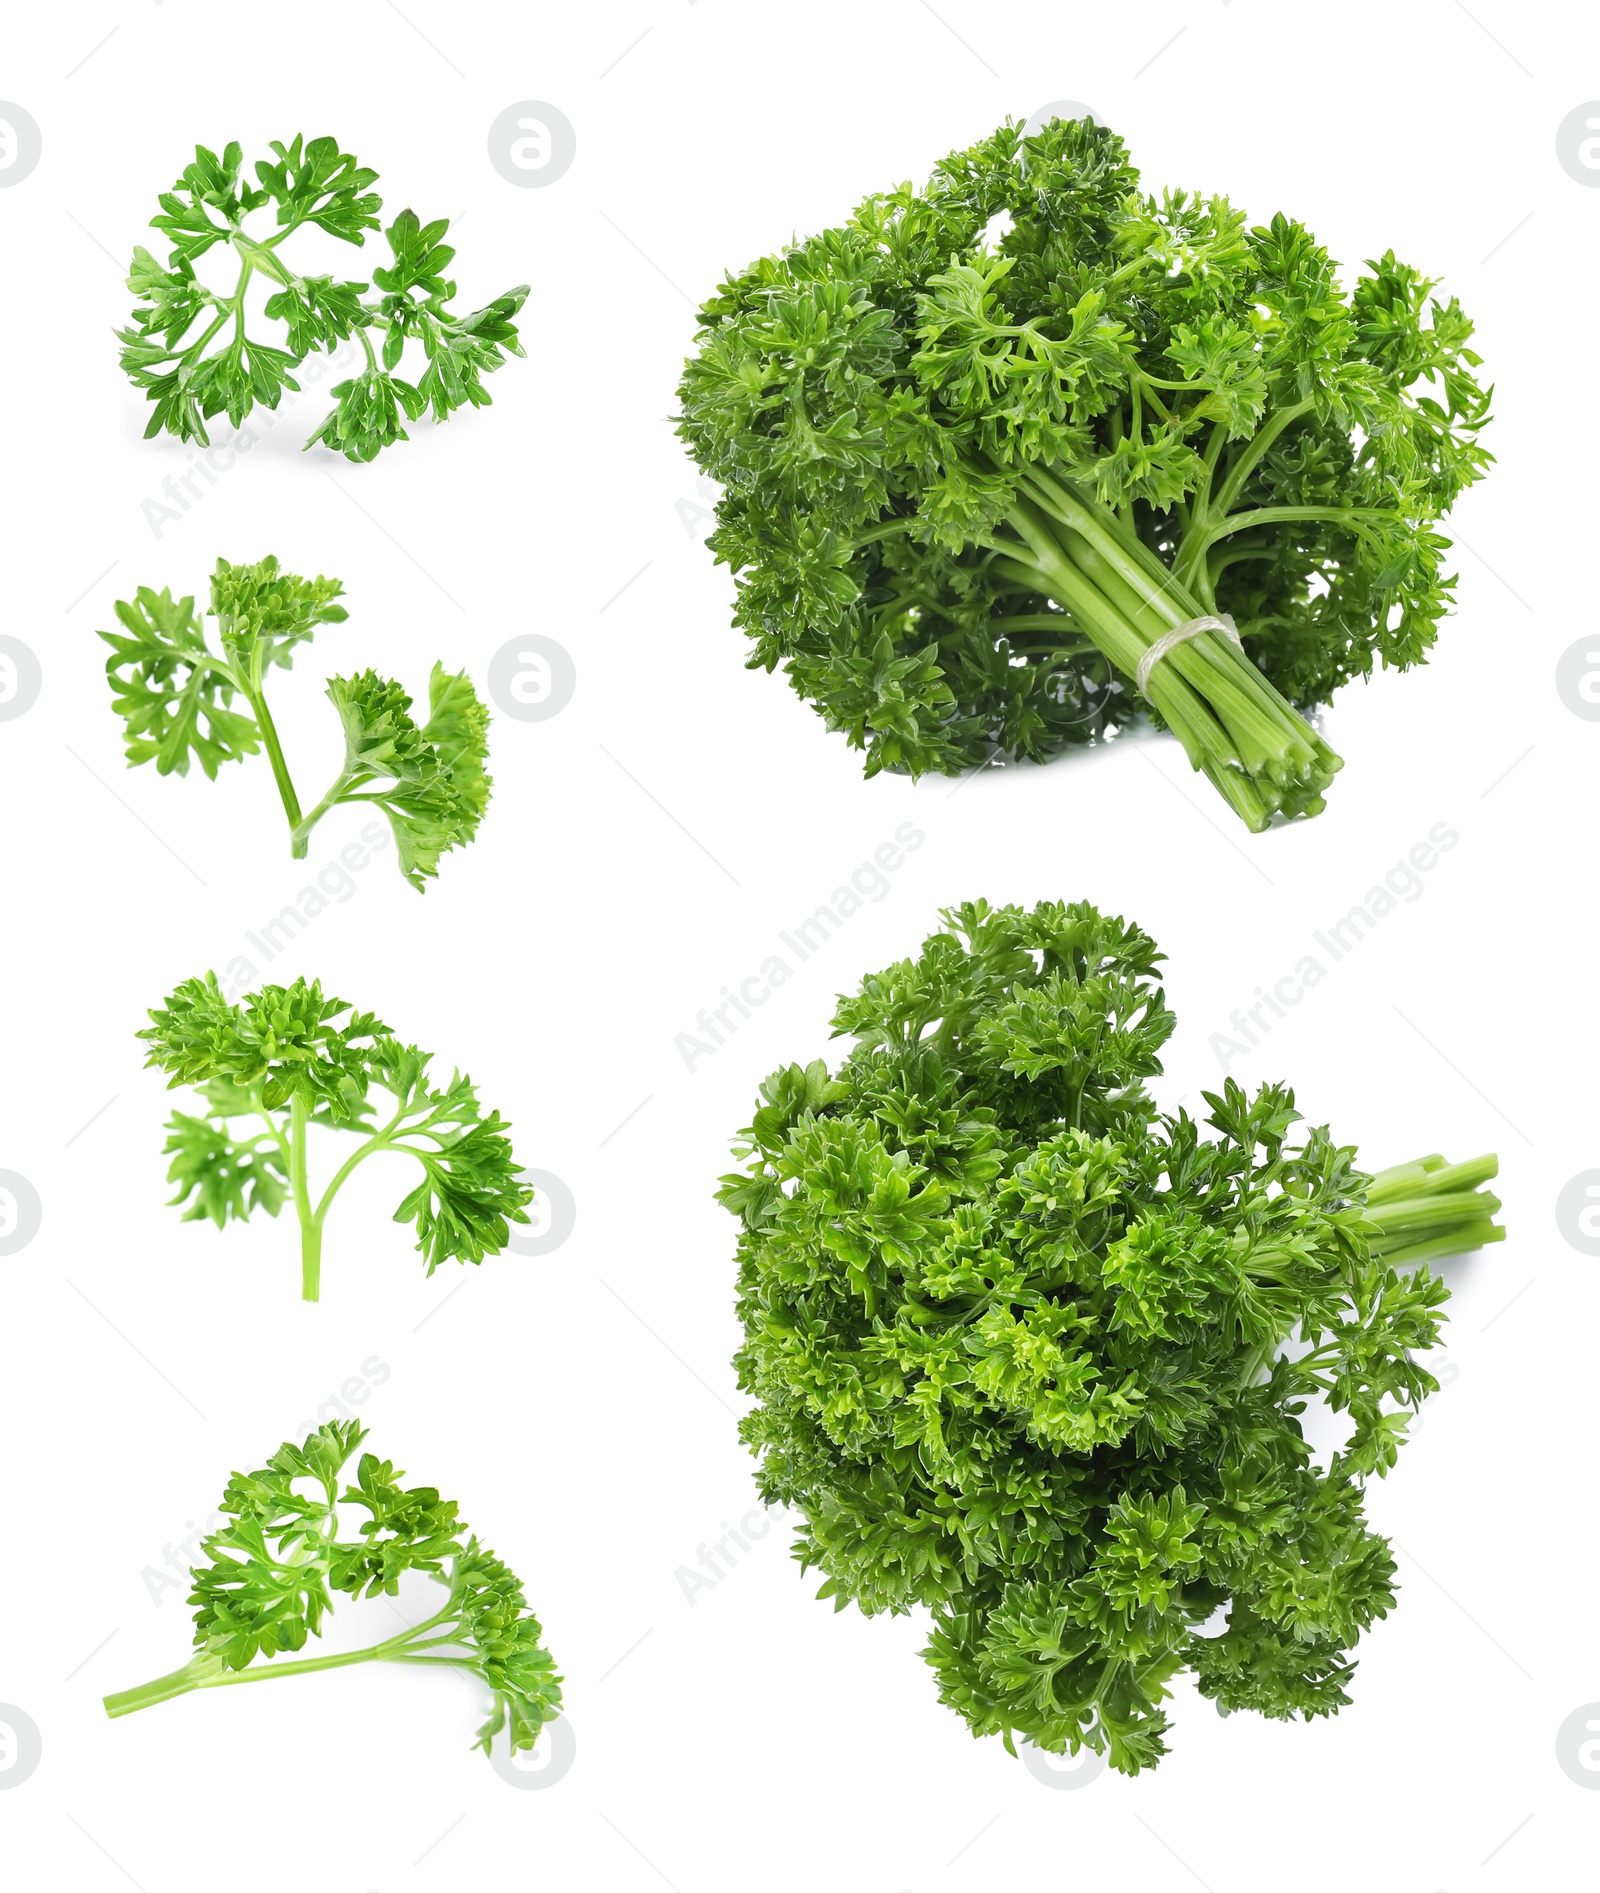 Image of Set of green curly parsley on white background